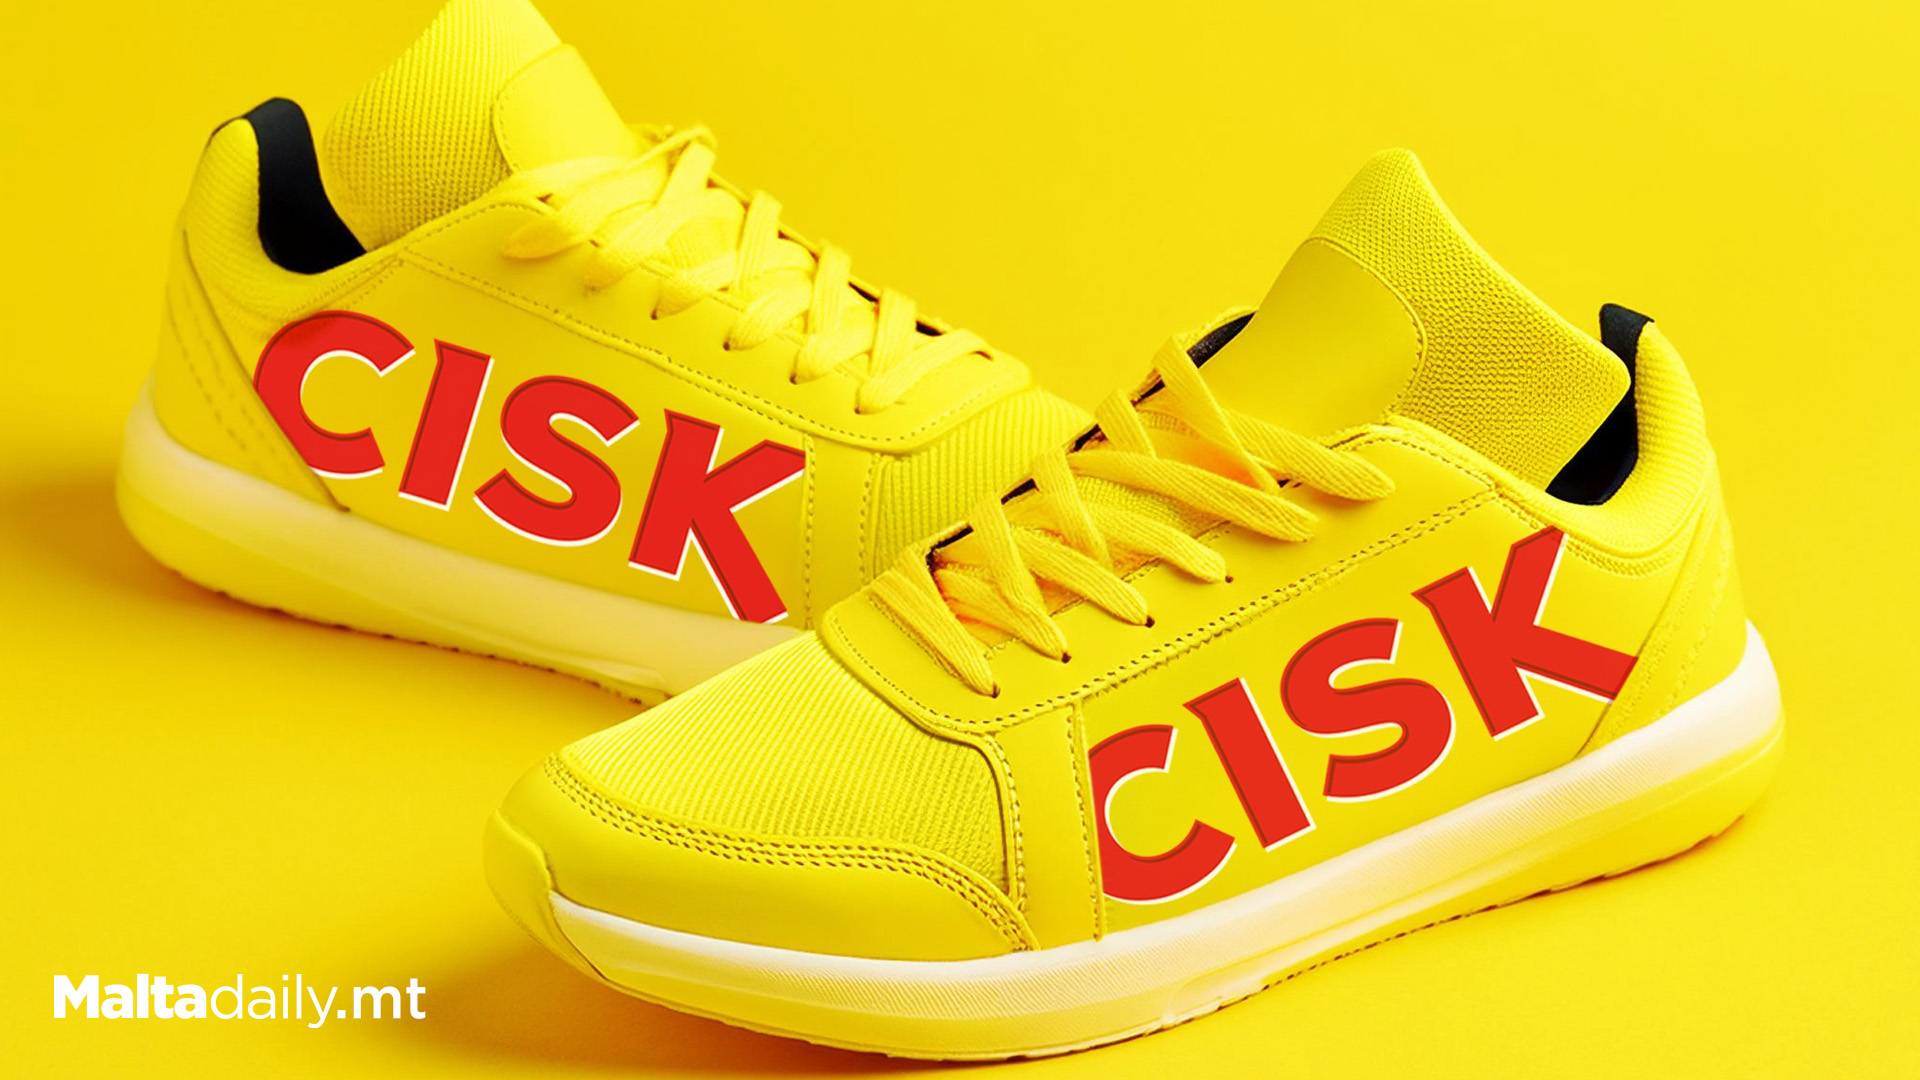 Cisk Tease Yellow Sneakers For April 1st